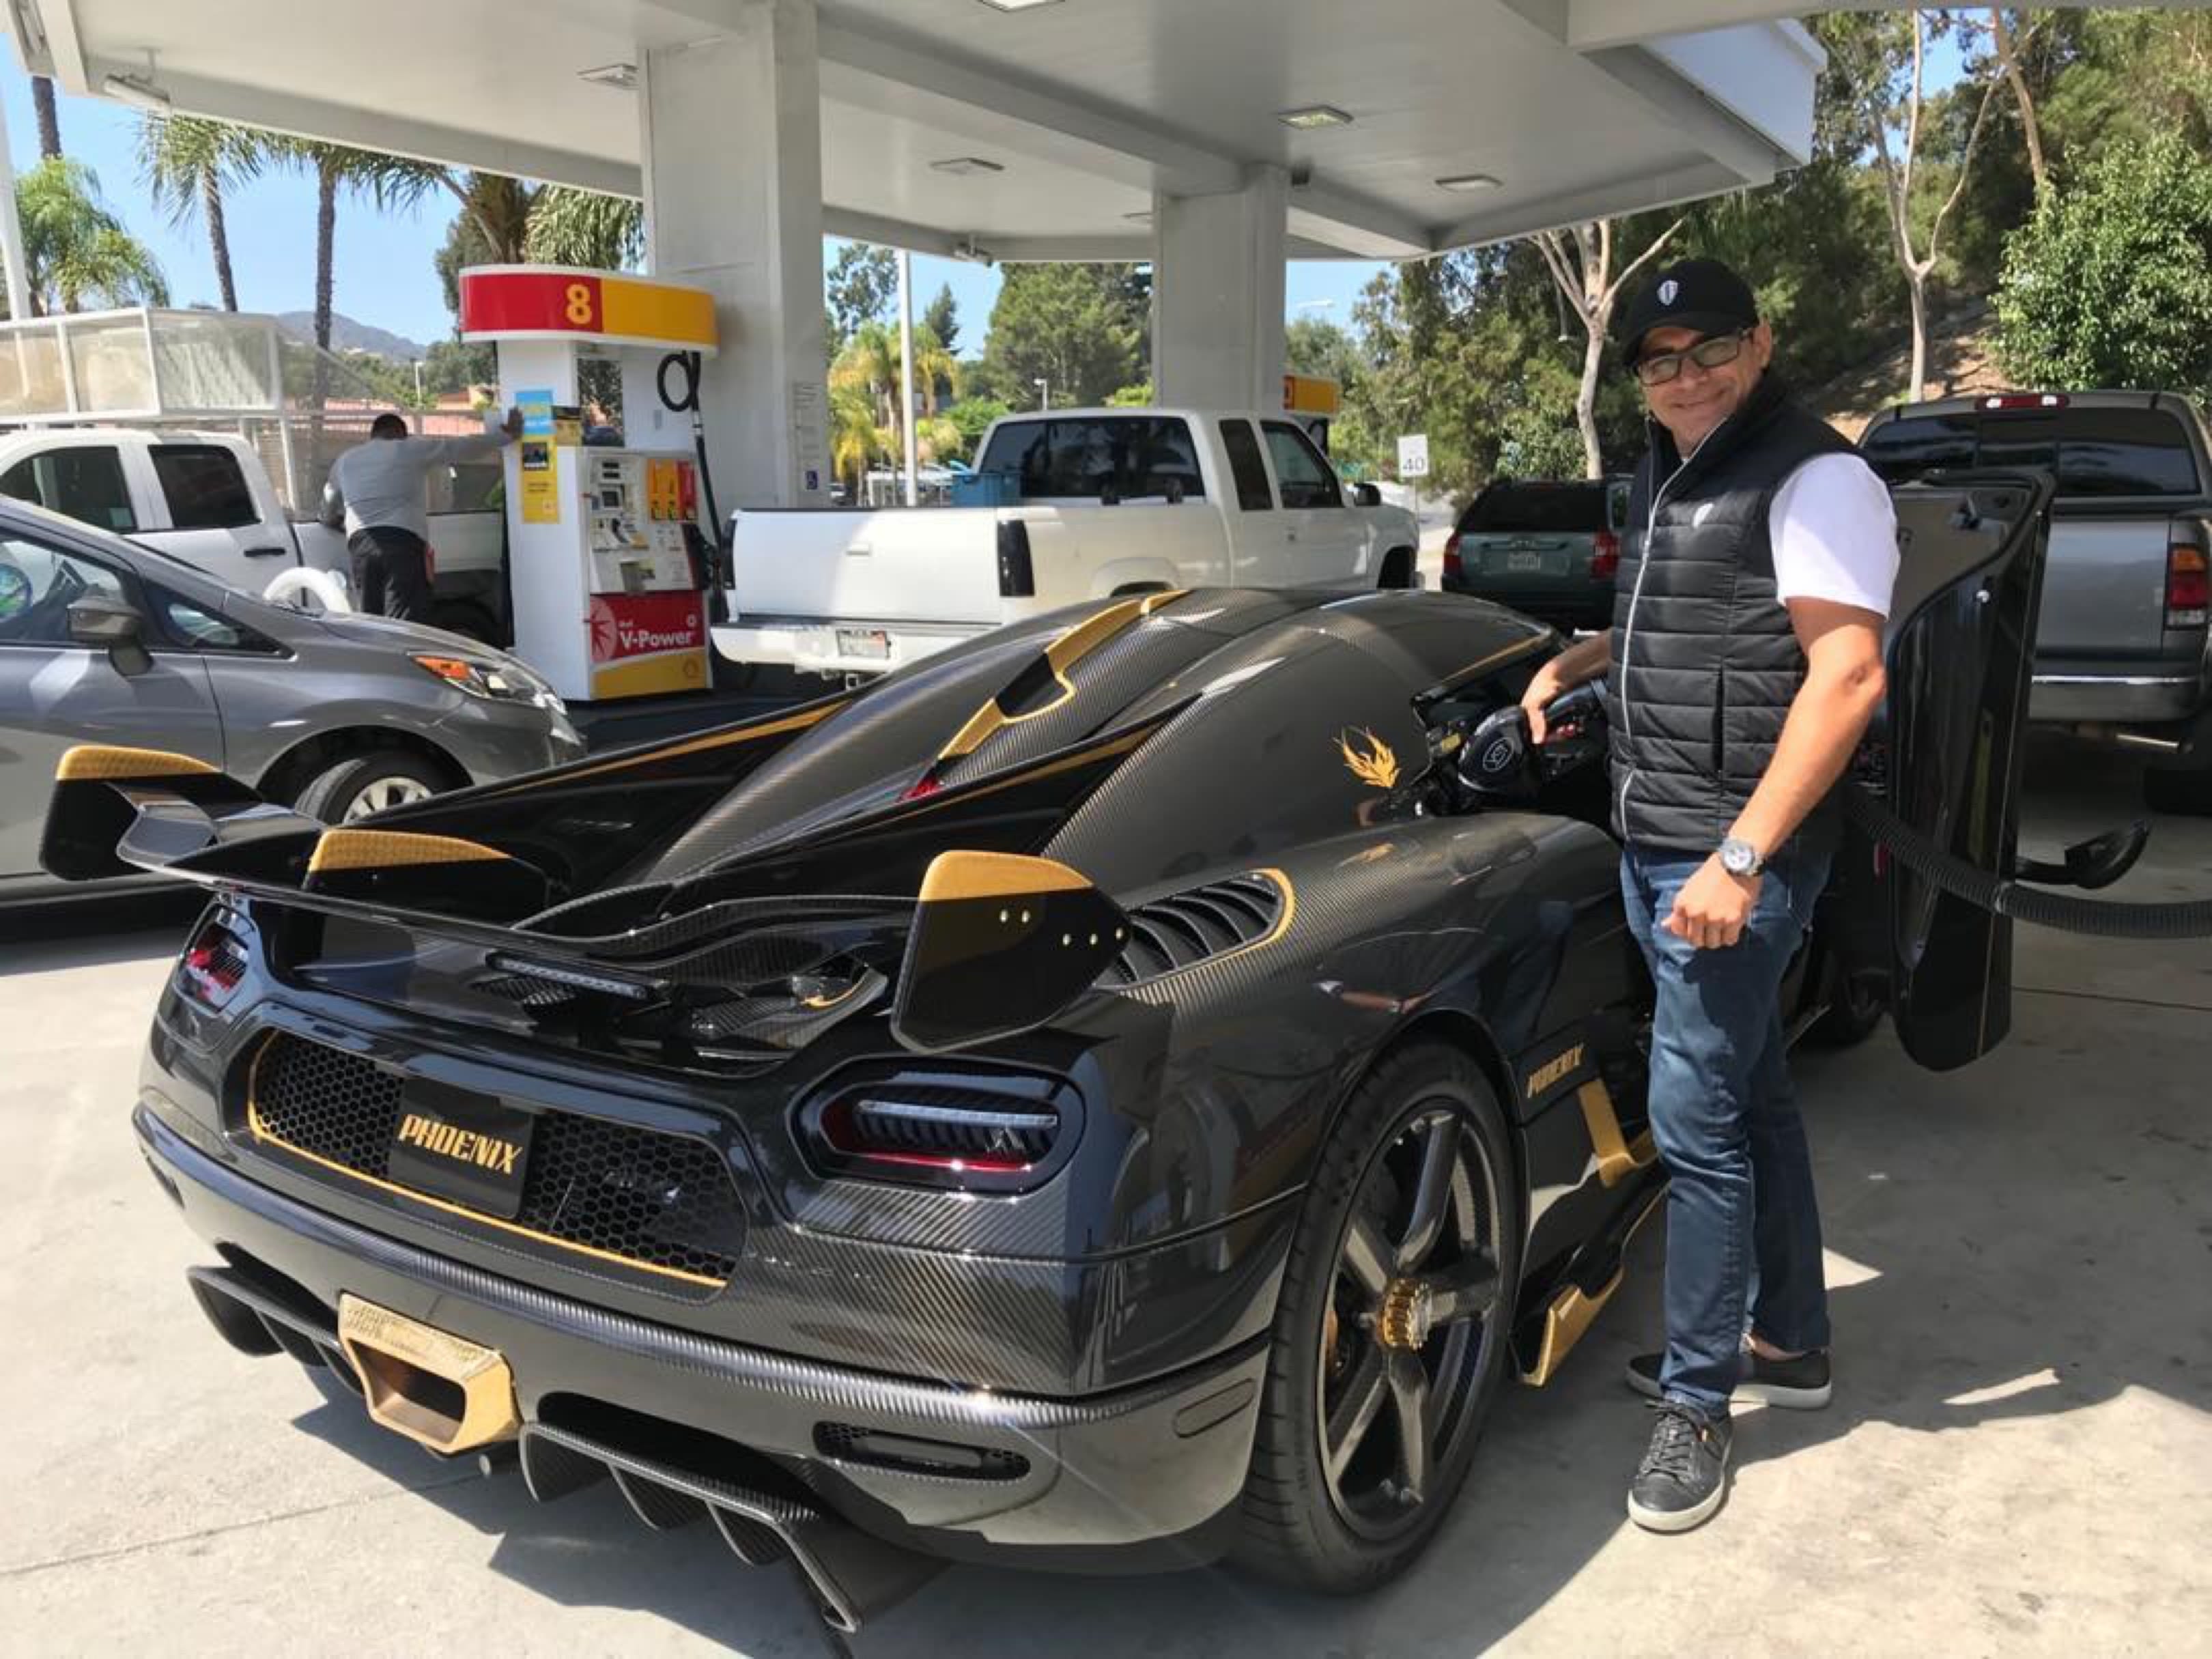 Real estate investor makes $11,875 a day in profit on Koenigsegg supercar